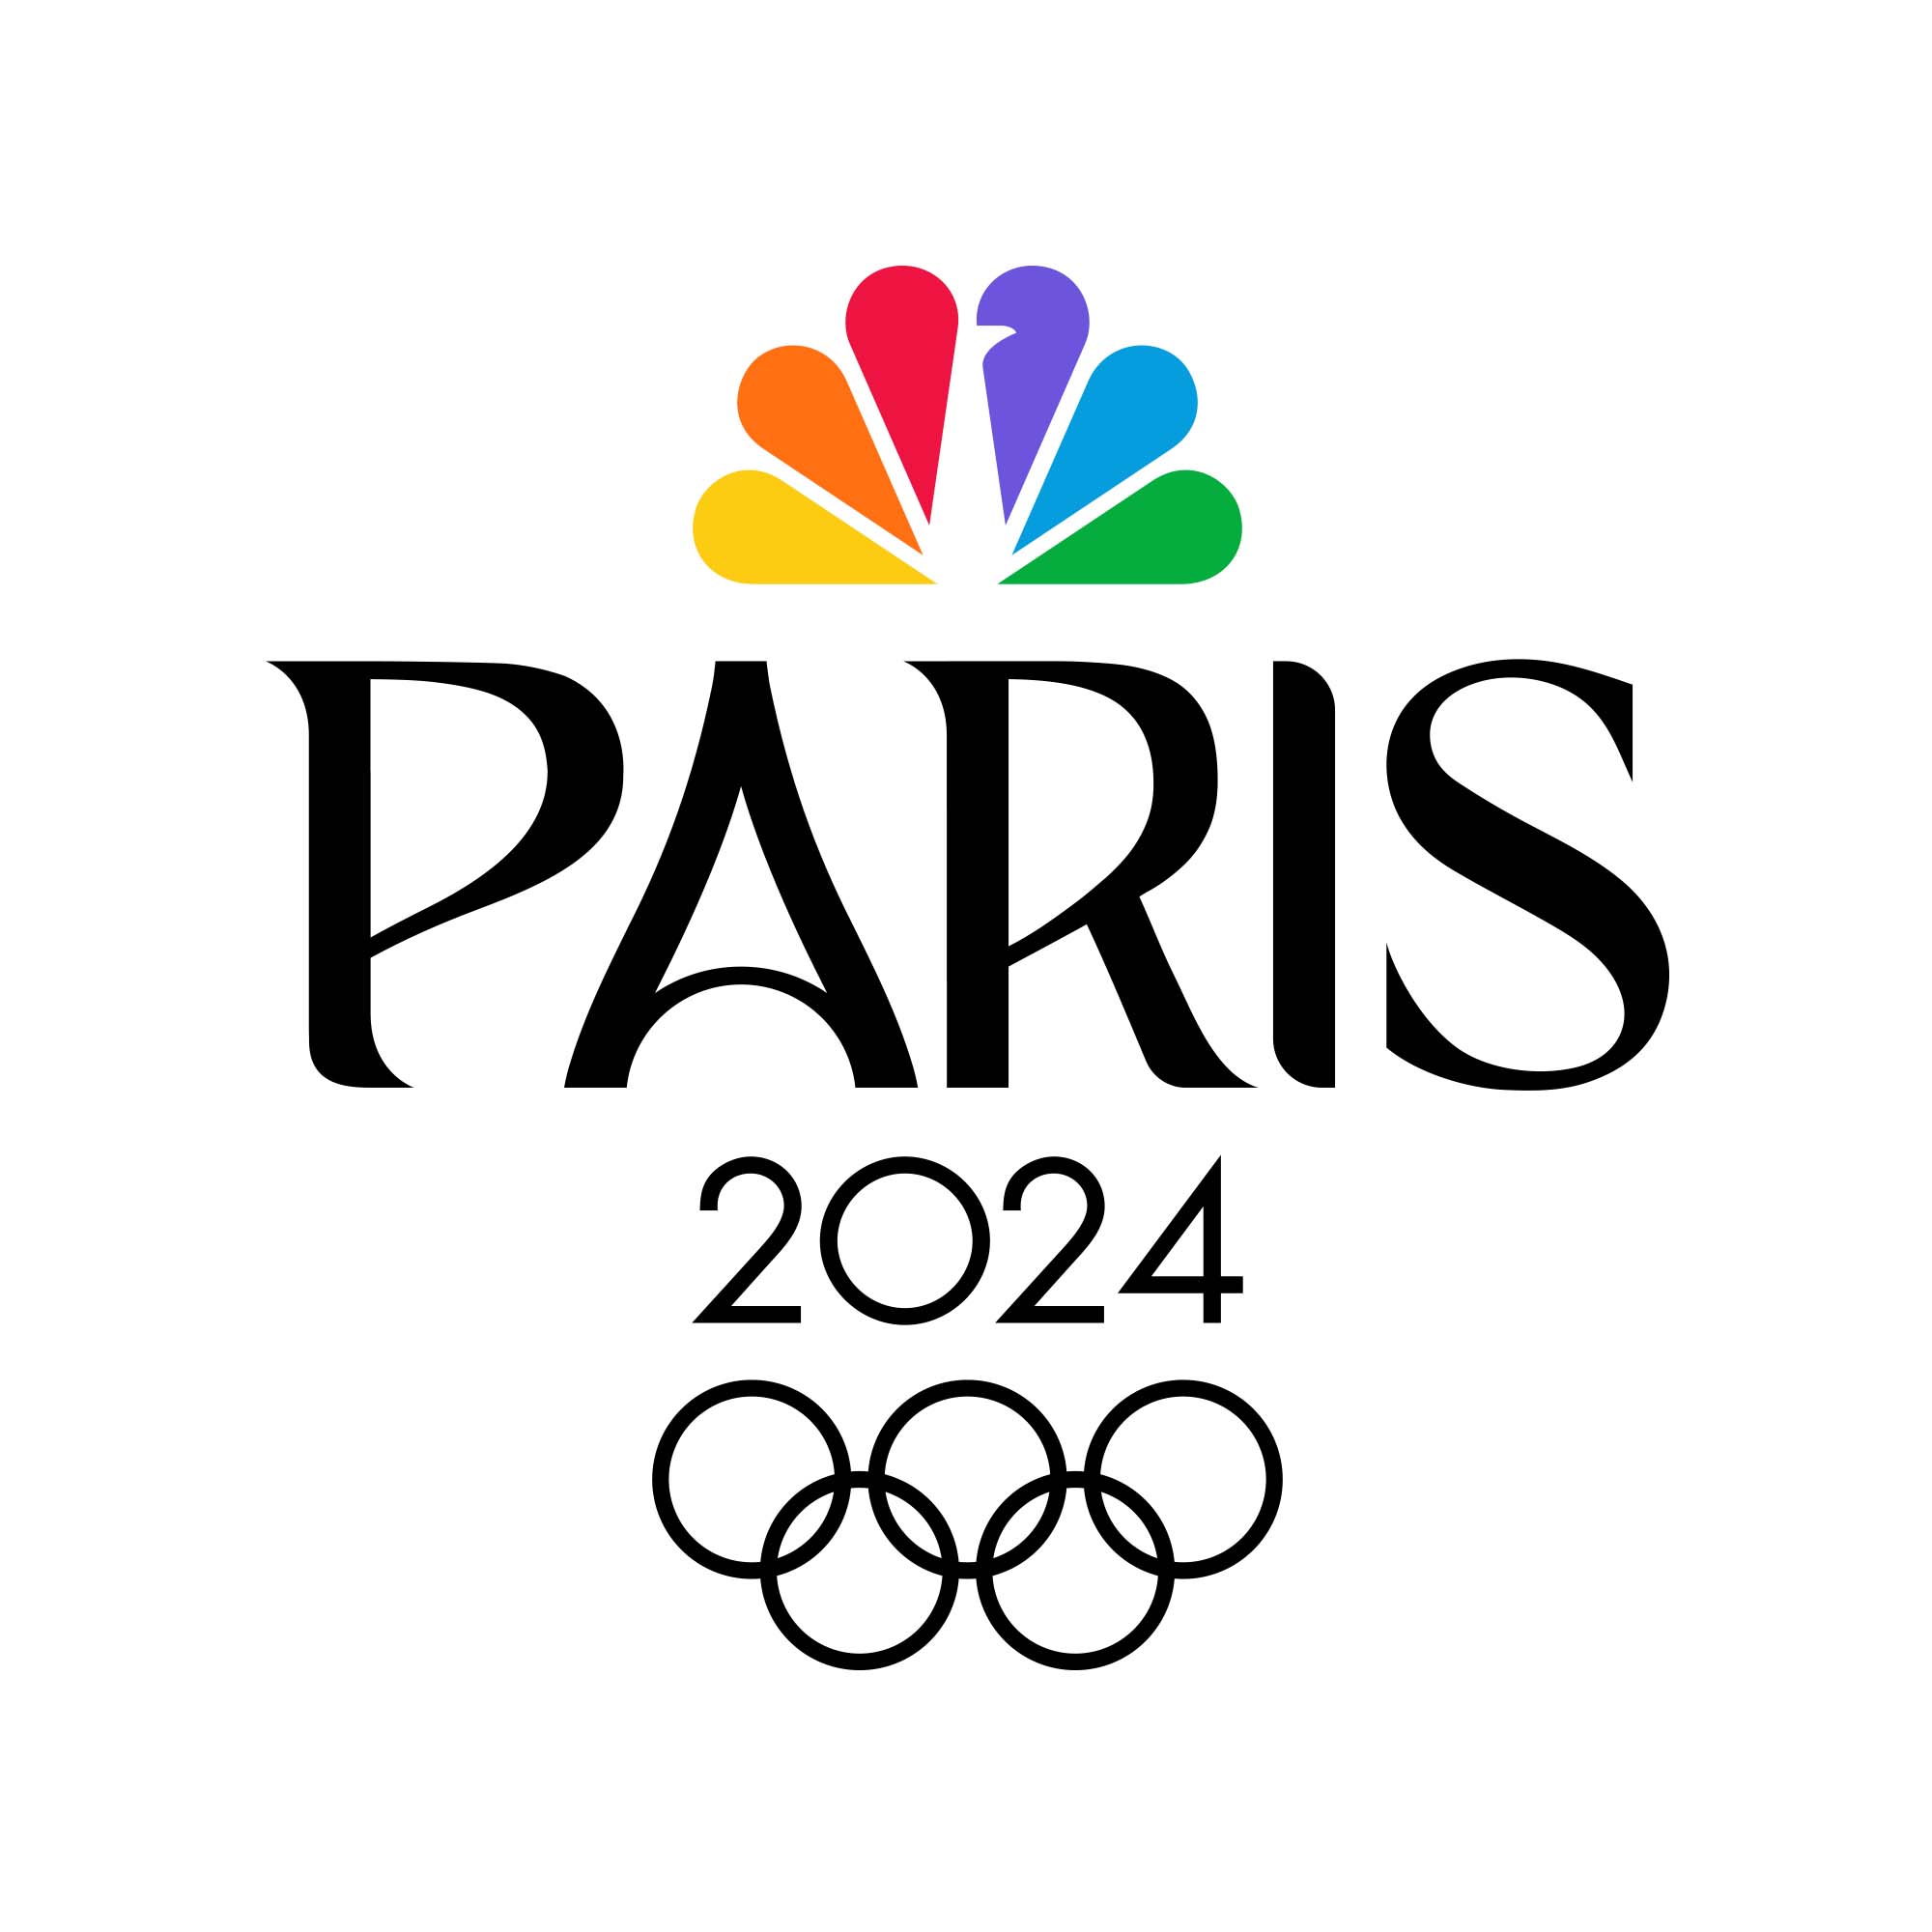 NBCUniversal Teams Up With Twitter to Promote 2024…